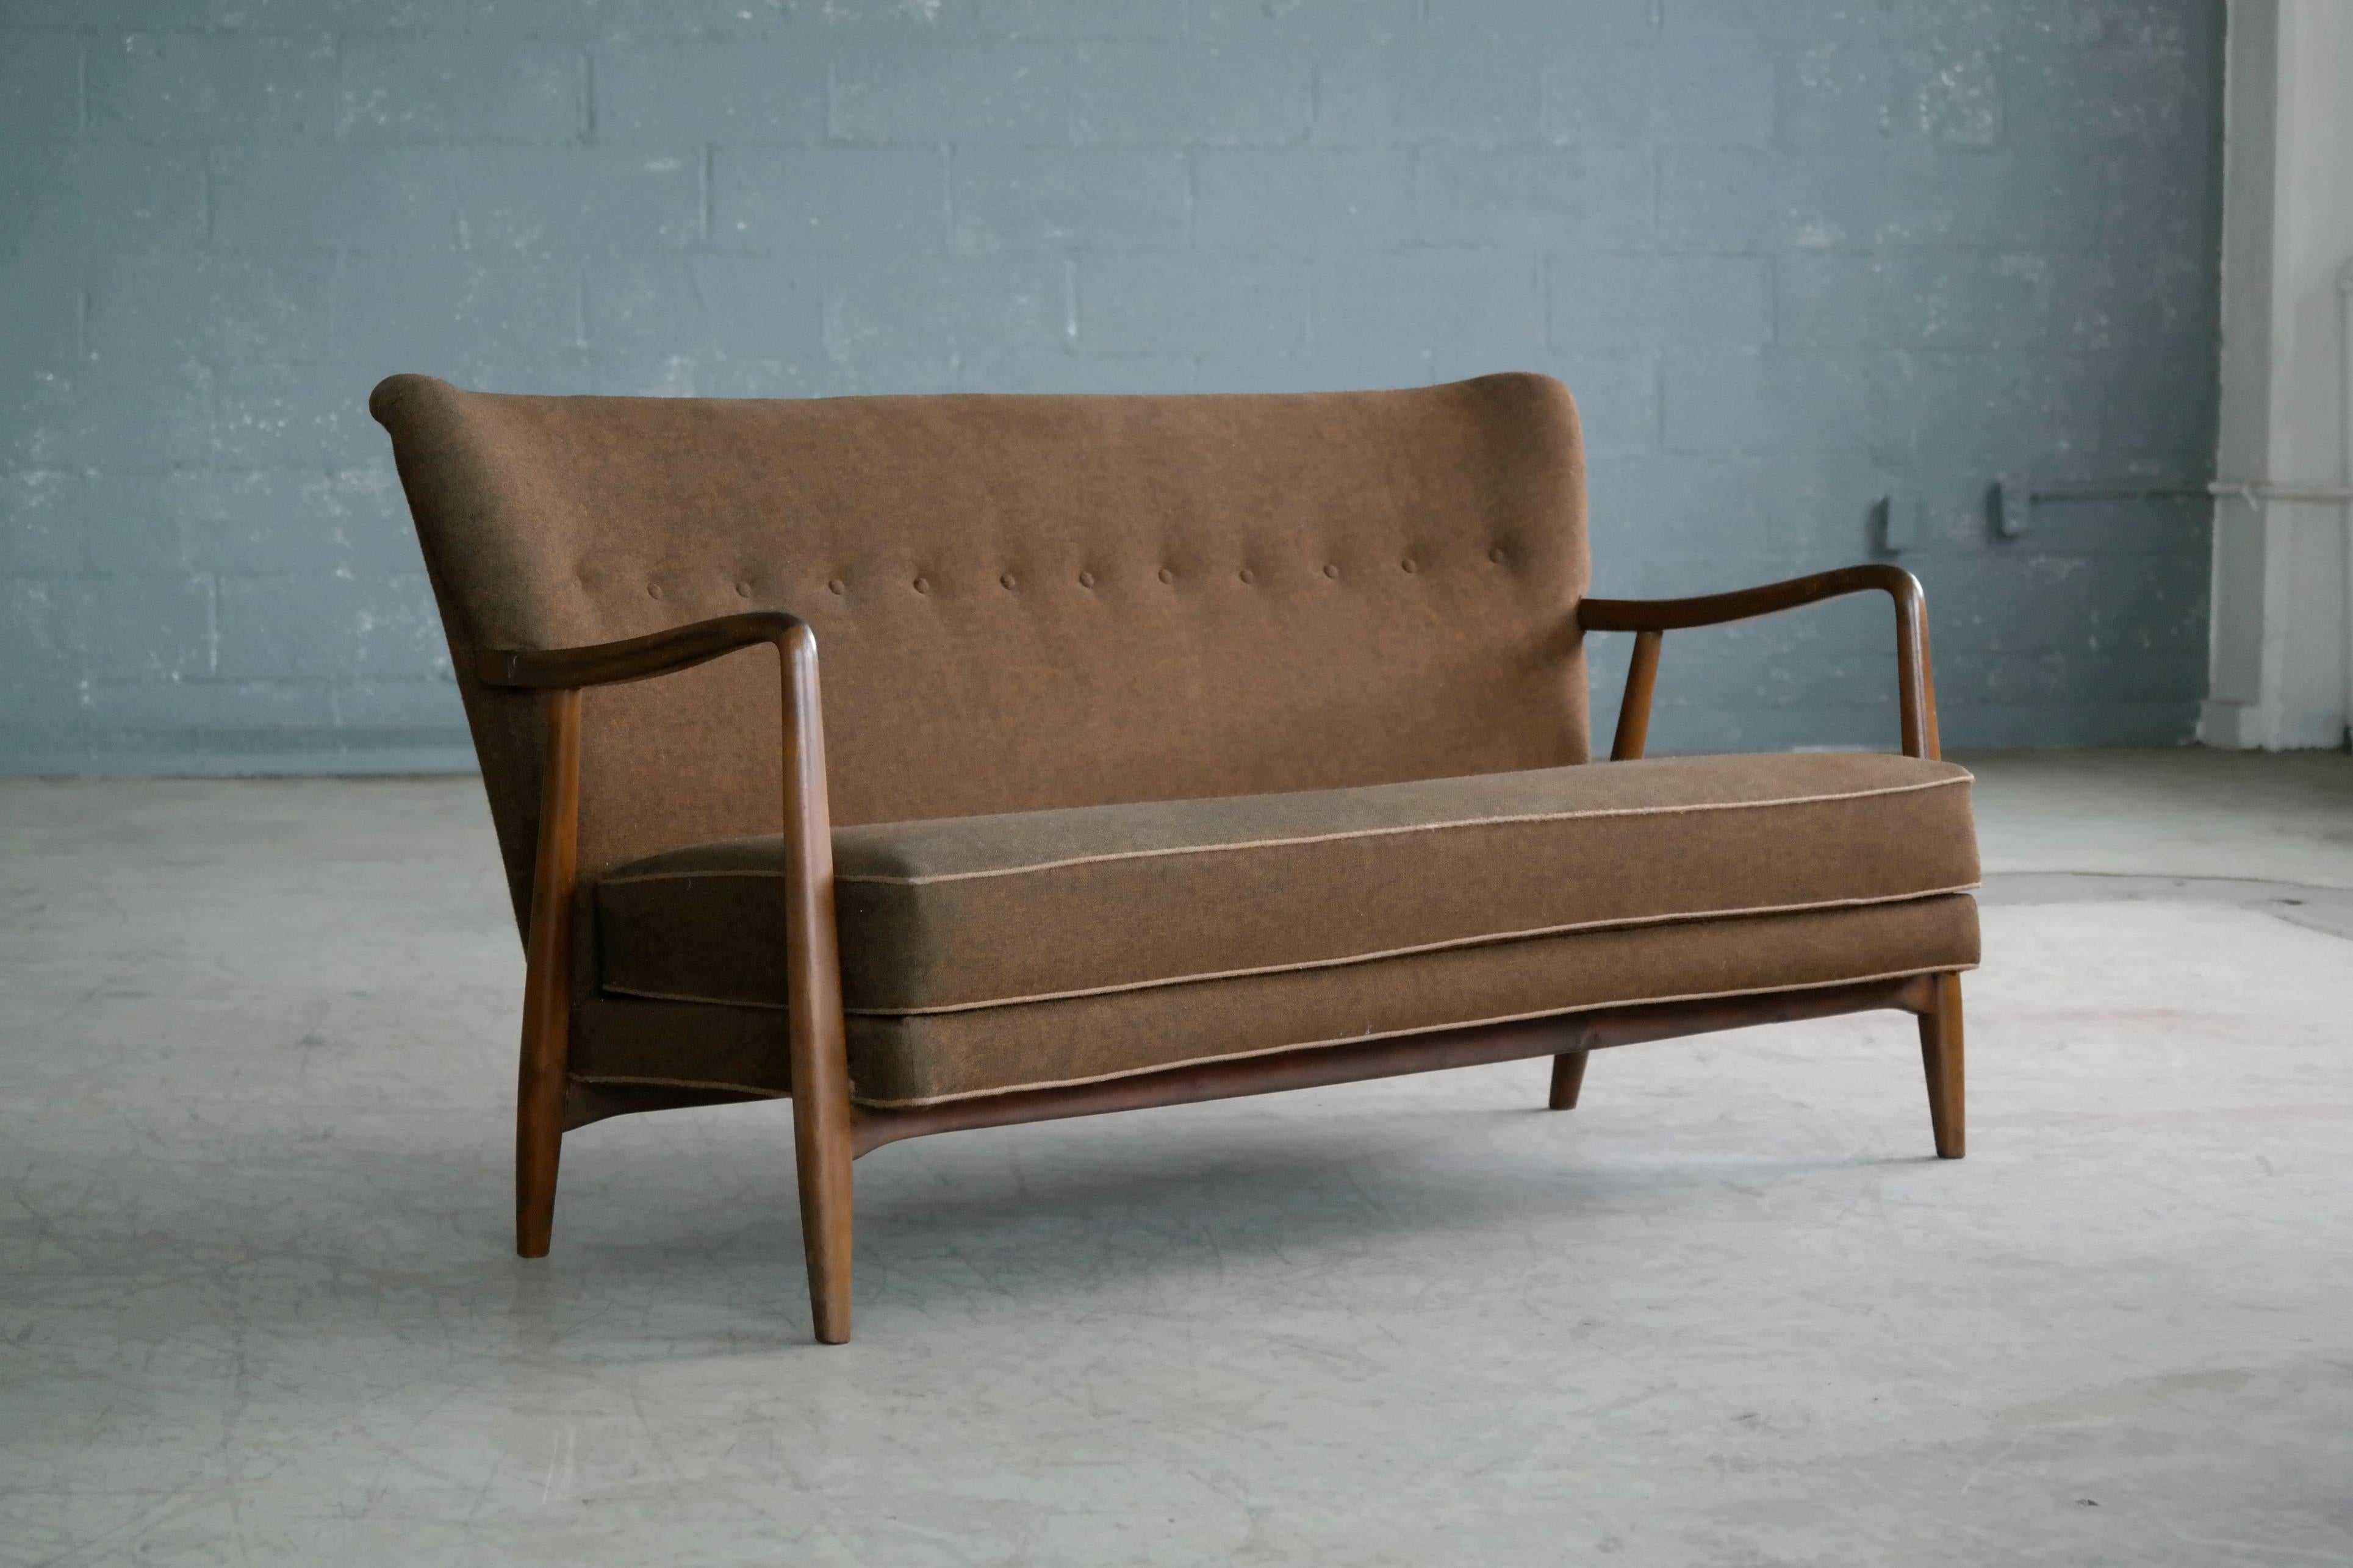 Elegant Danish midcentury settee in the style of Aksel Bender Madsen. We found the settee in Copenhagen but have not seen any identical settees over the years and we are unsure of the maker/designer. Very nicely carved beech wood frame with the